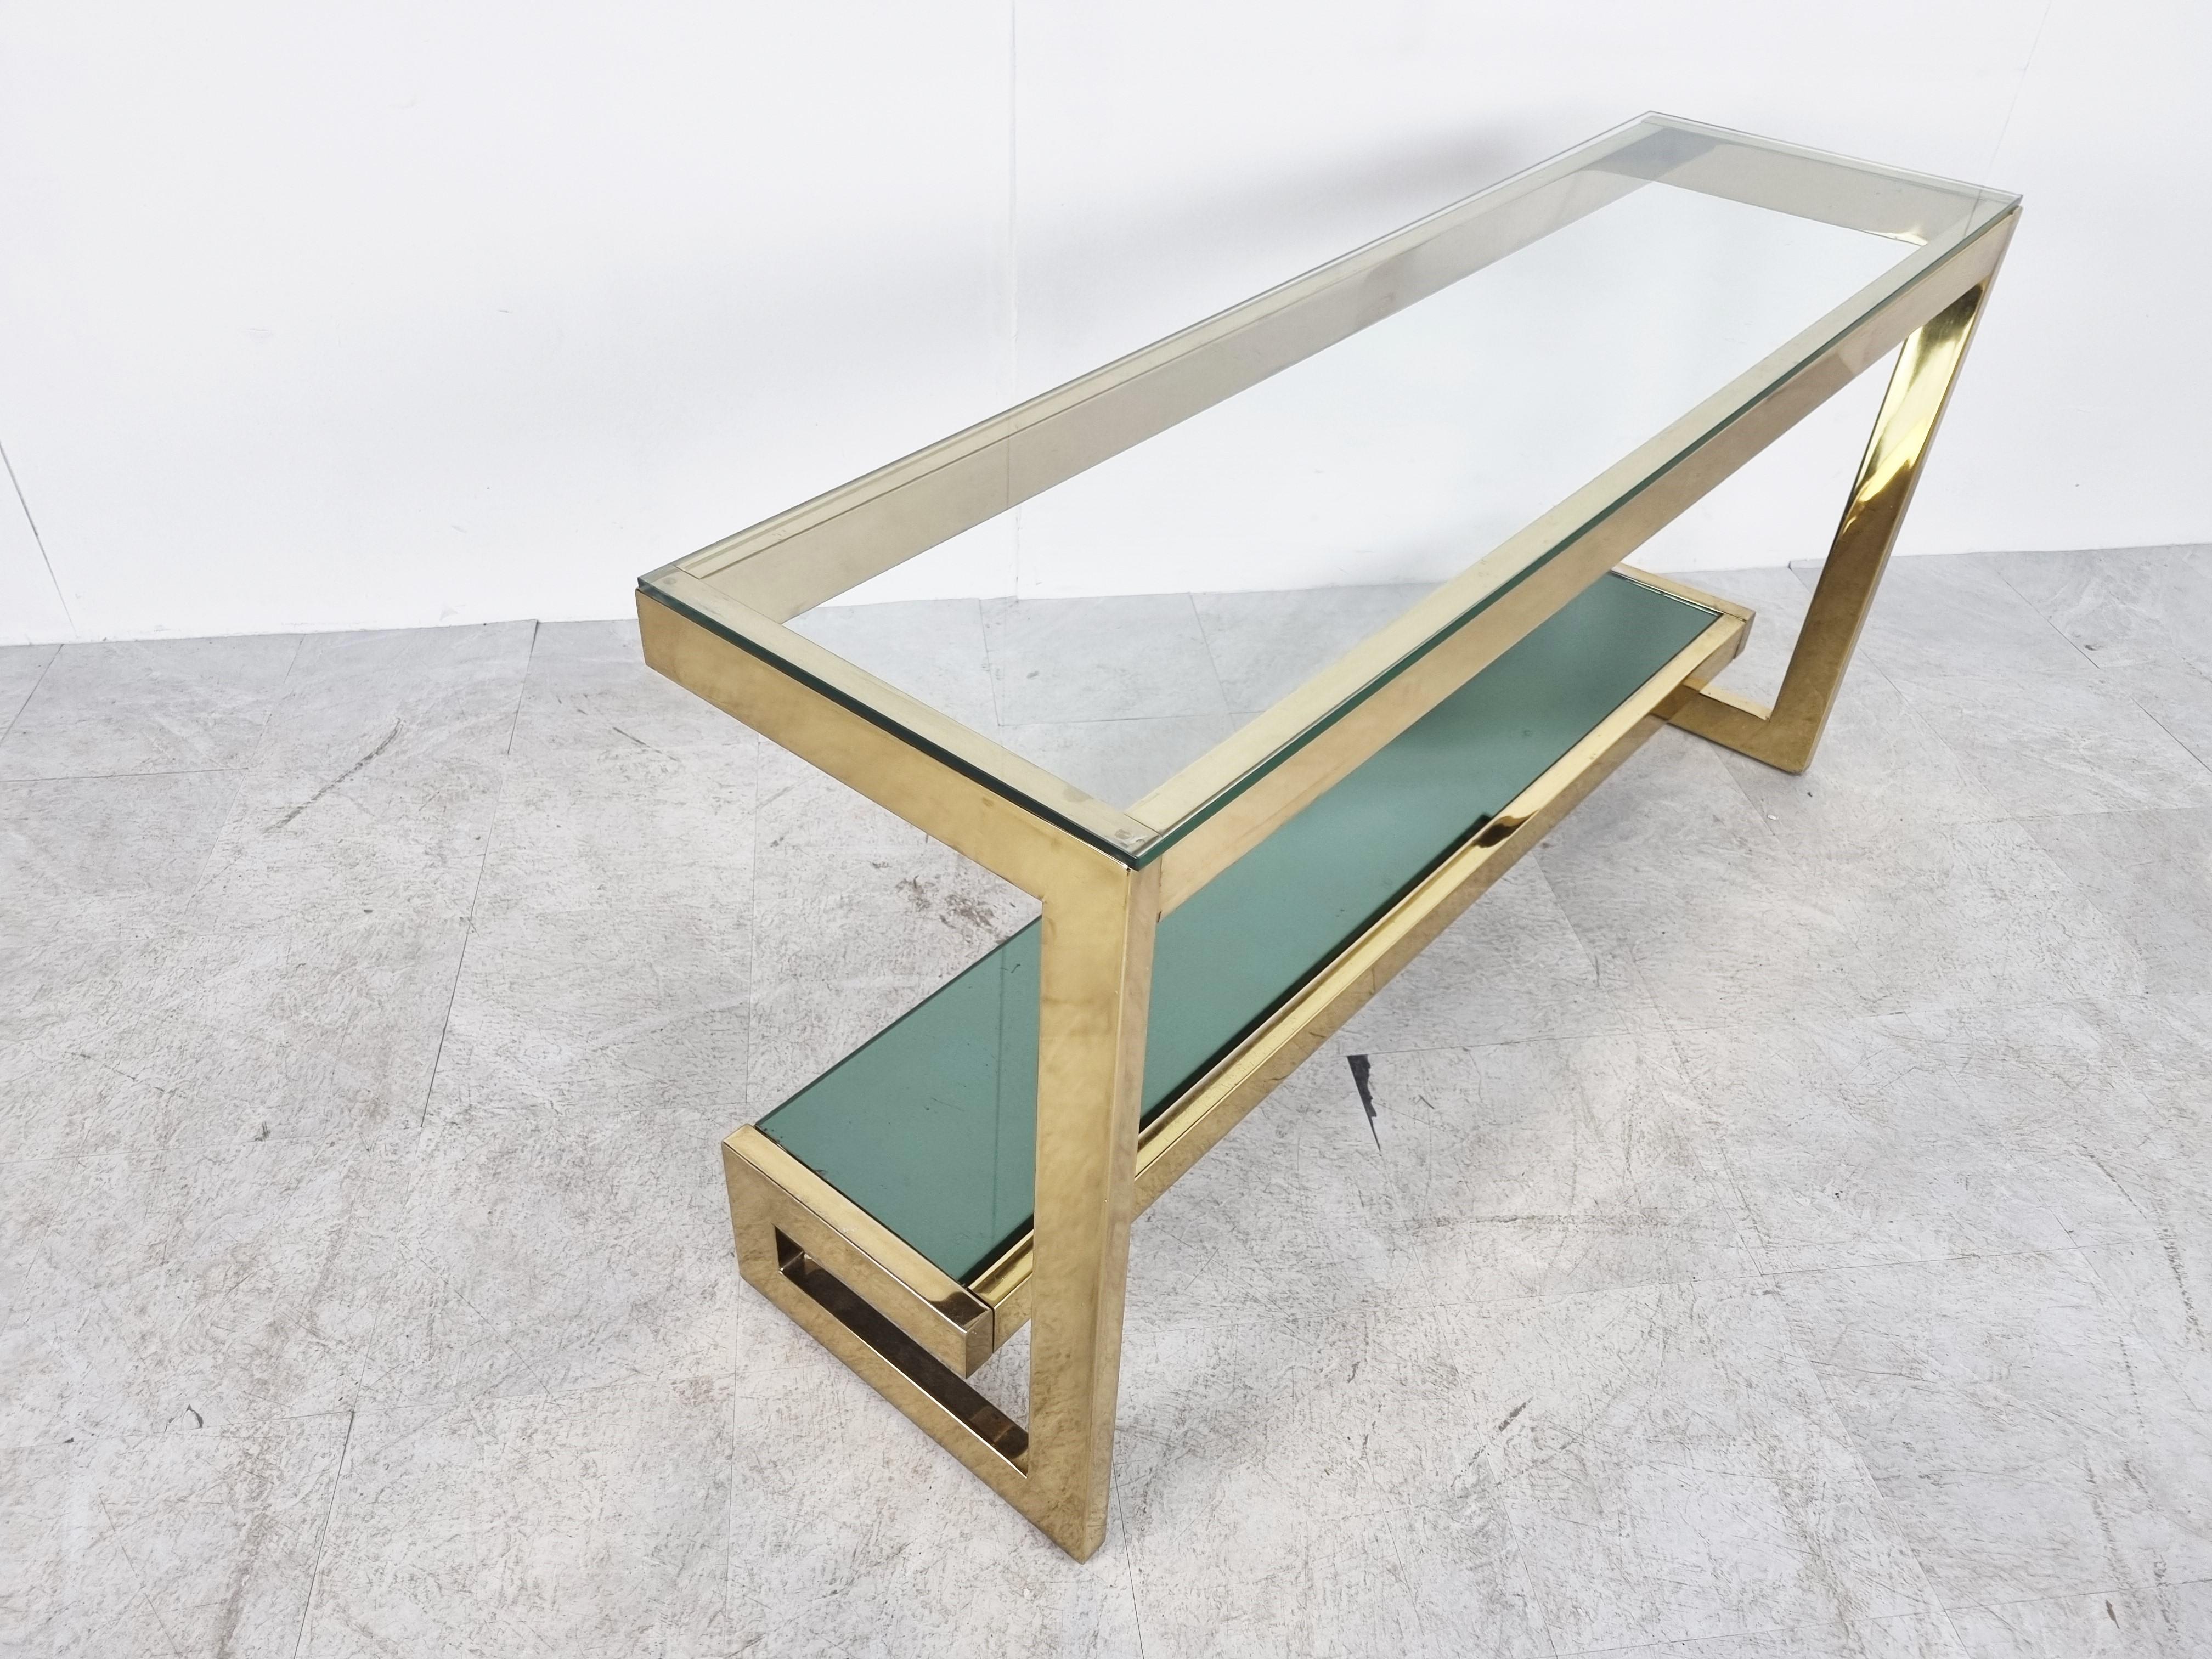 23kt gold layered 'G'-shaped console table produced by Belgochrom.

The table has mirrored and clear glass tops

Original condition with some wear on the brass, condition as picture. The glass is in good condition. Over the item look very